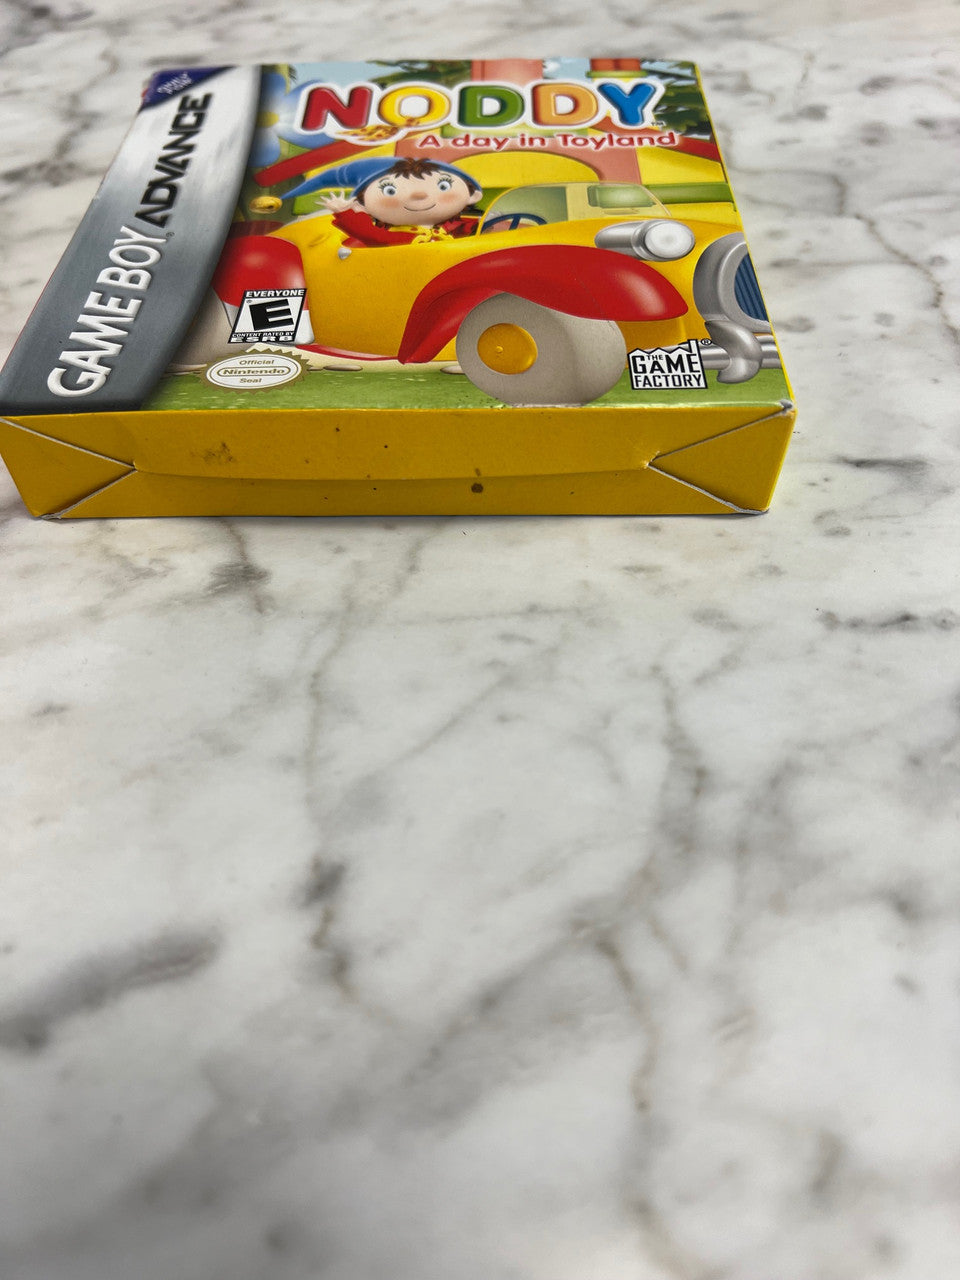 Noddy A Day in Toyland Game Boy Advance Box and manual only